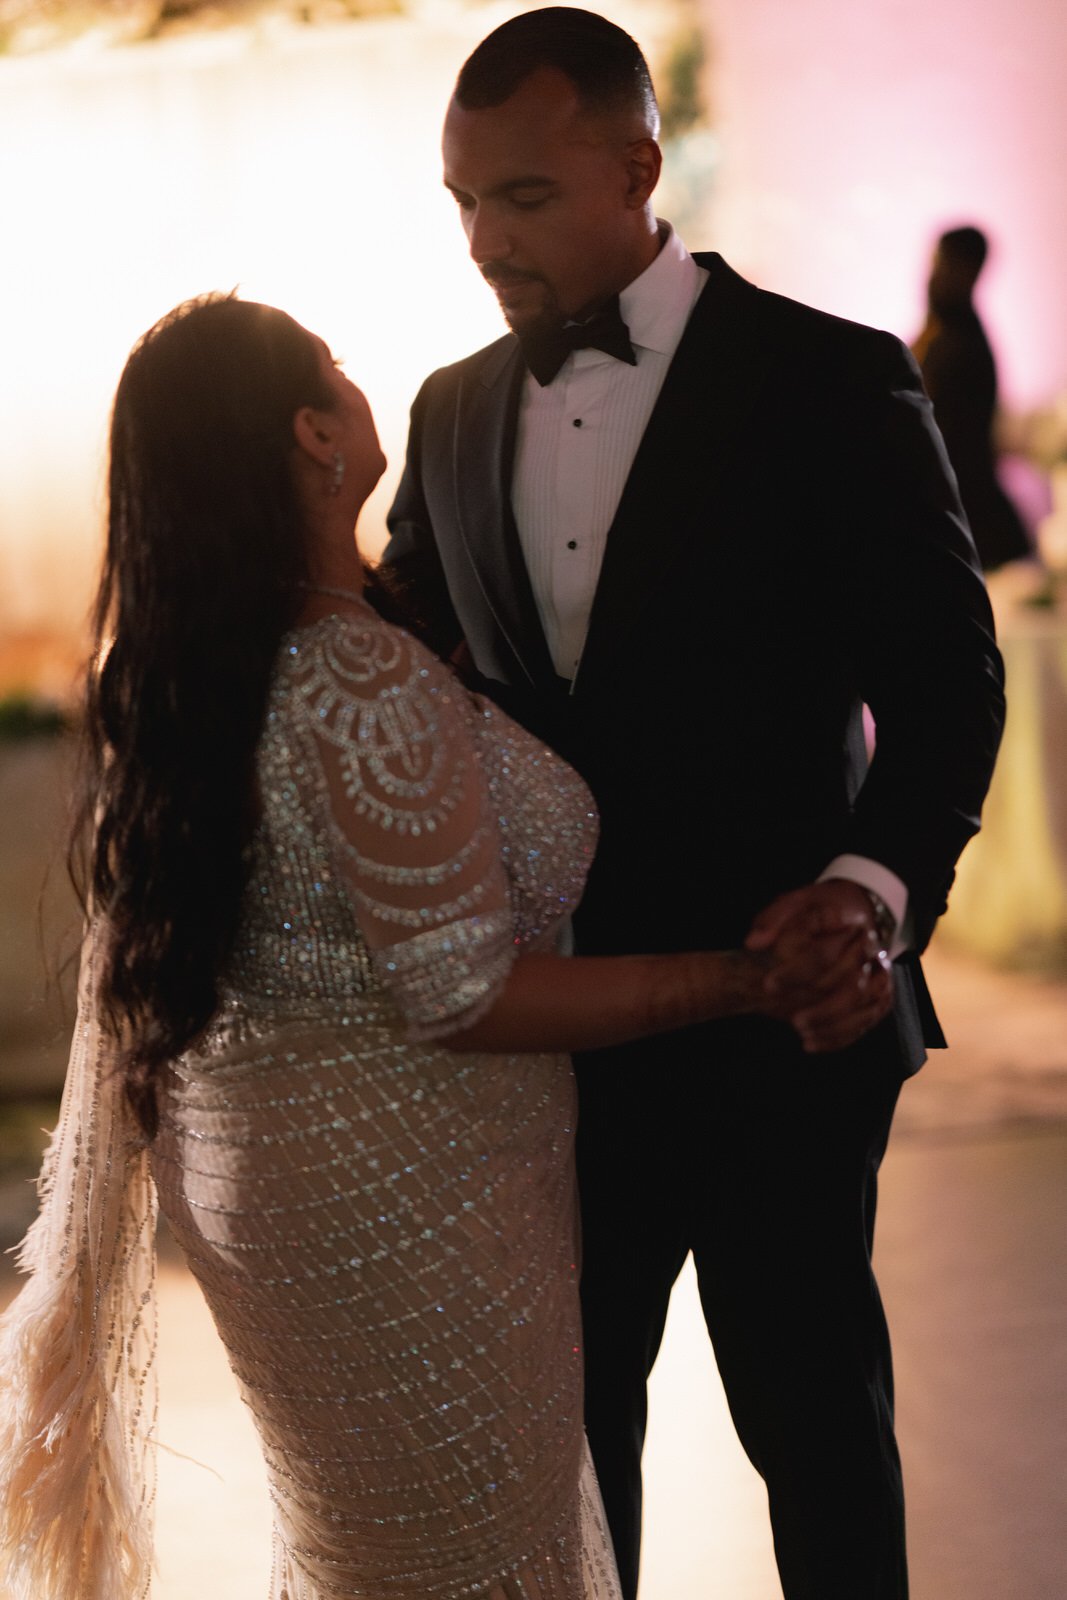 Luxury Indian Wedding in Miami Florida - Indian wedding photographer miami florida - michelle gonzalez photography - loews hotel in coral gables wedding-126.jpg